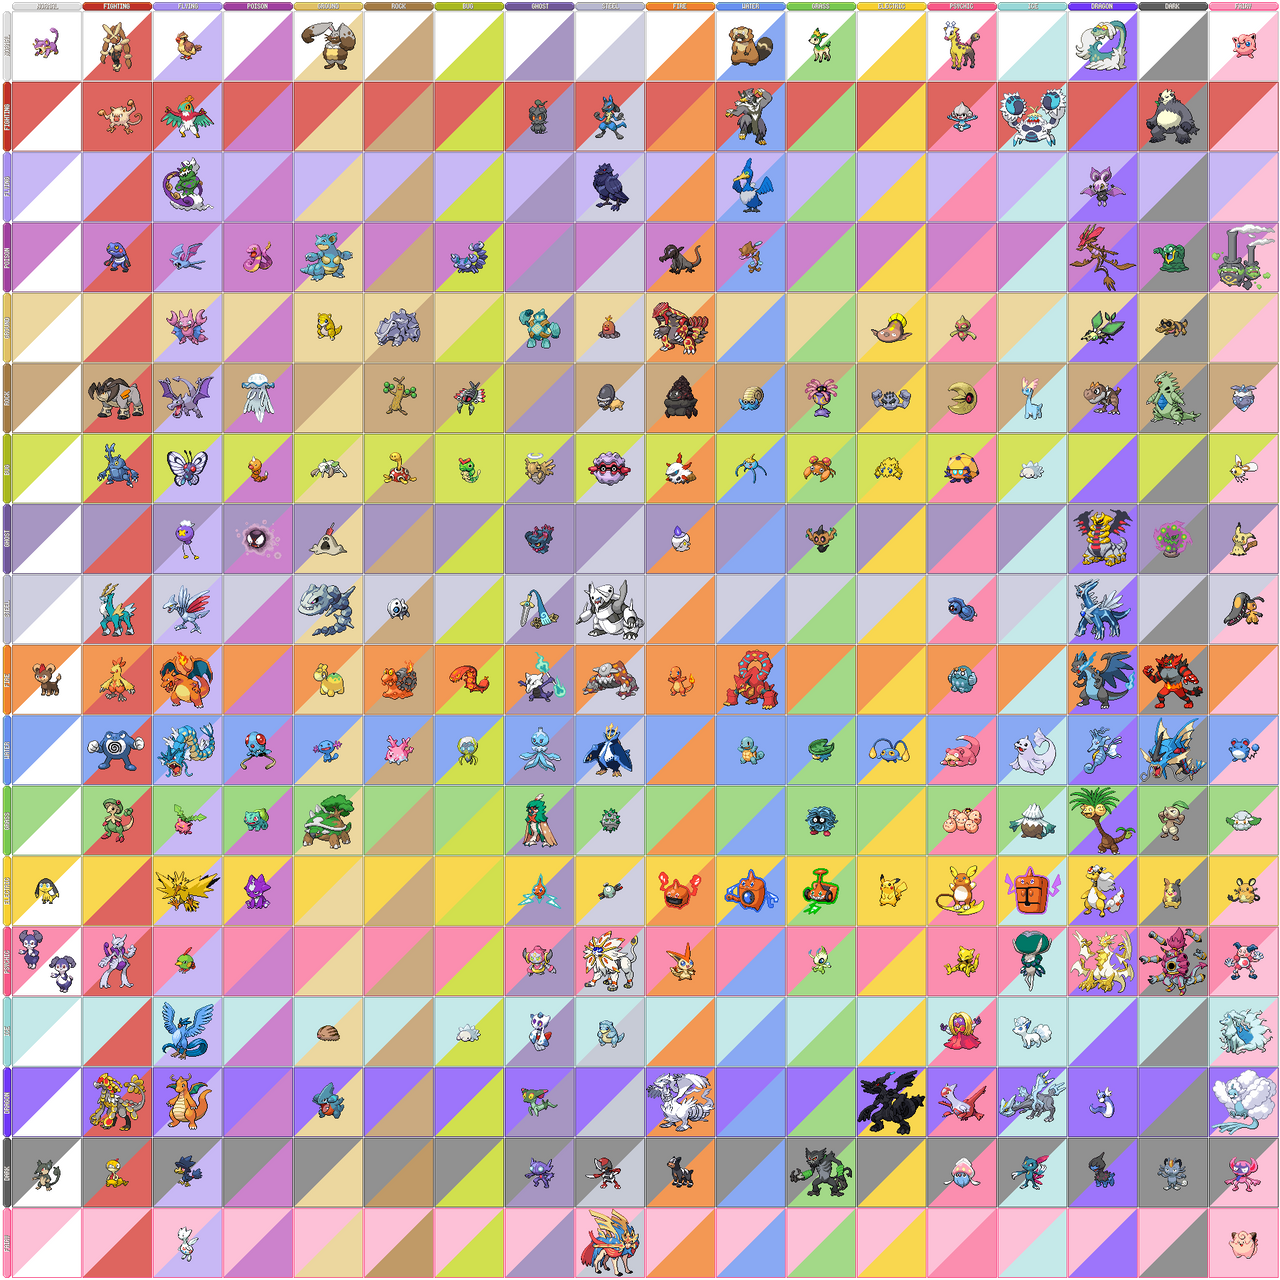 Pokemon Type Chart with all Type Combinations so far.